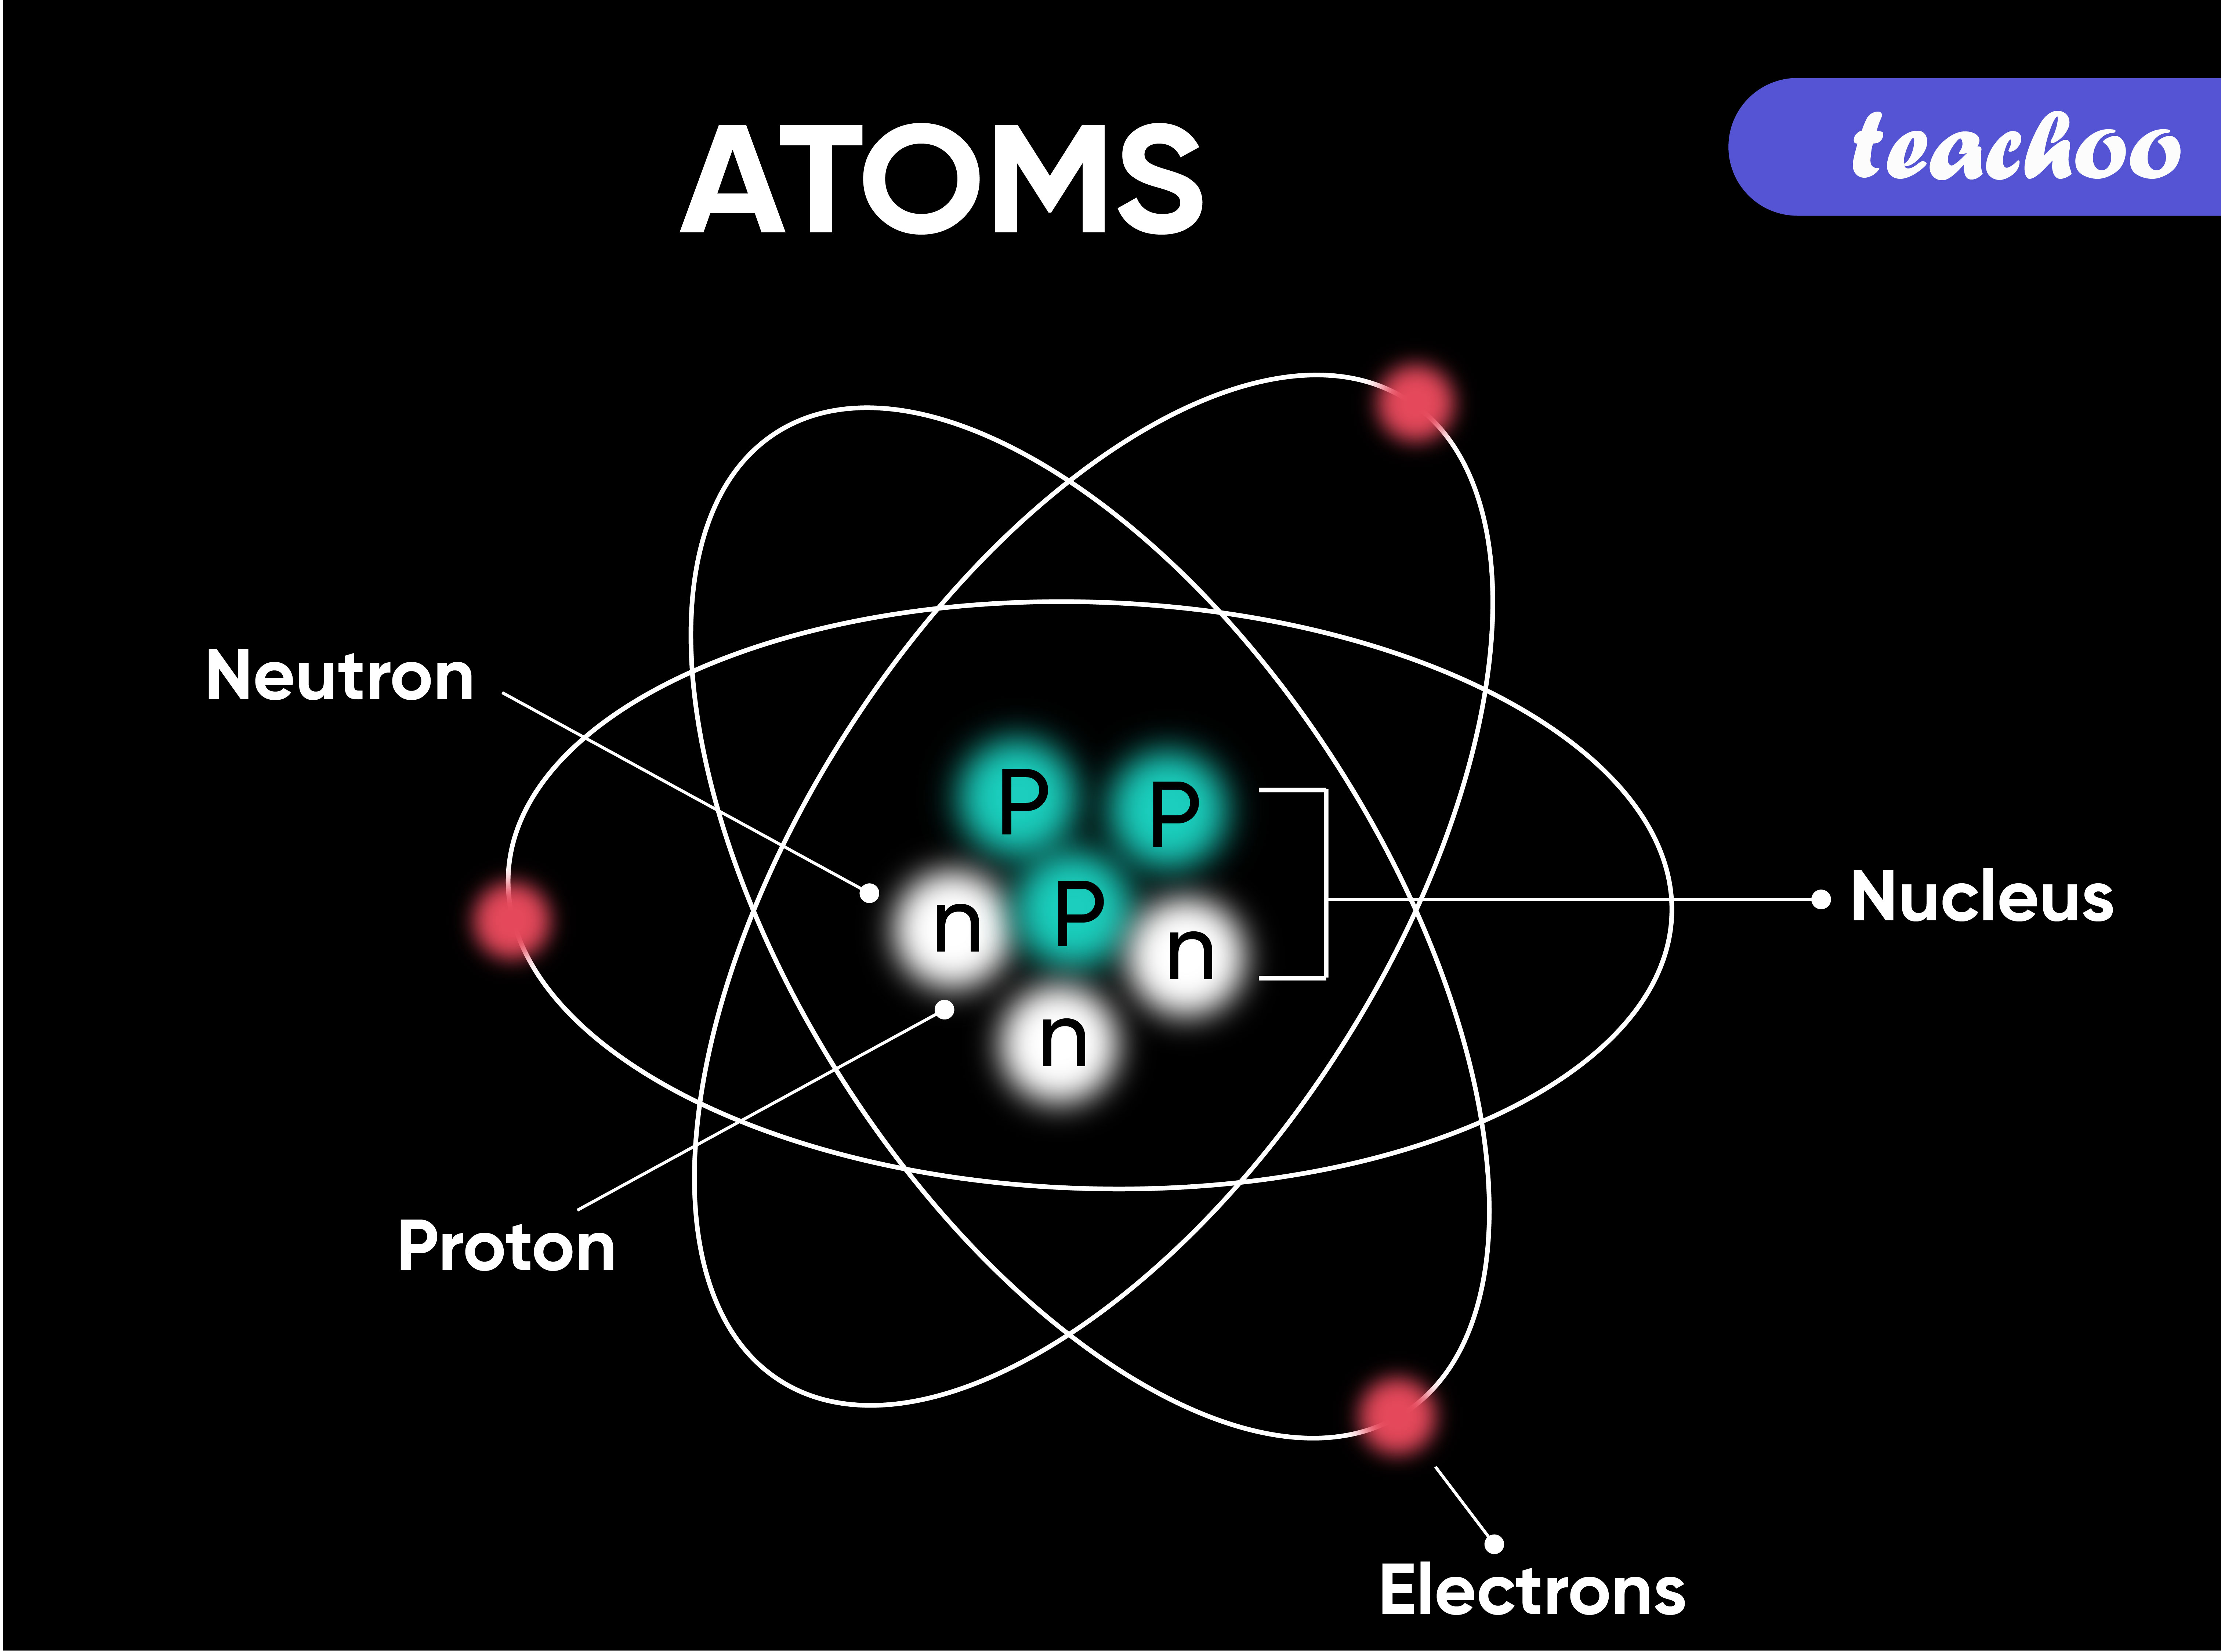 ions-meaning-and-examples-in-chemistry-teachoo-concepts